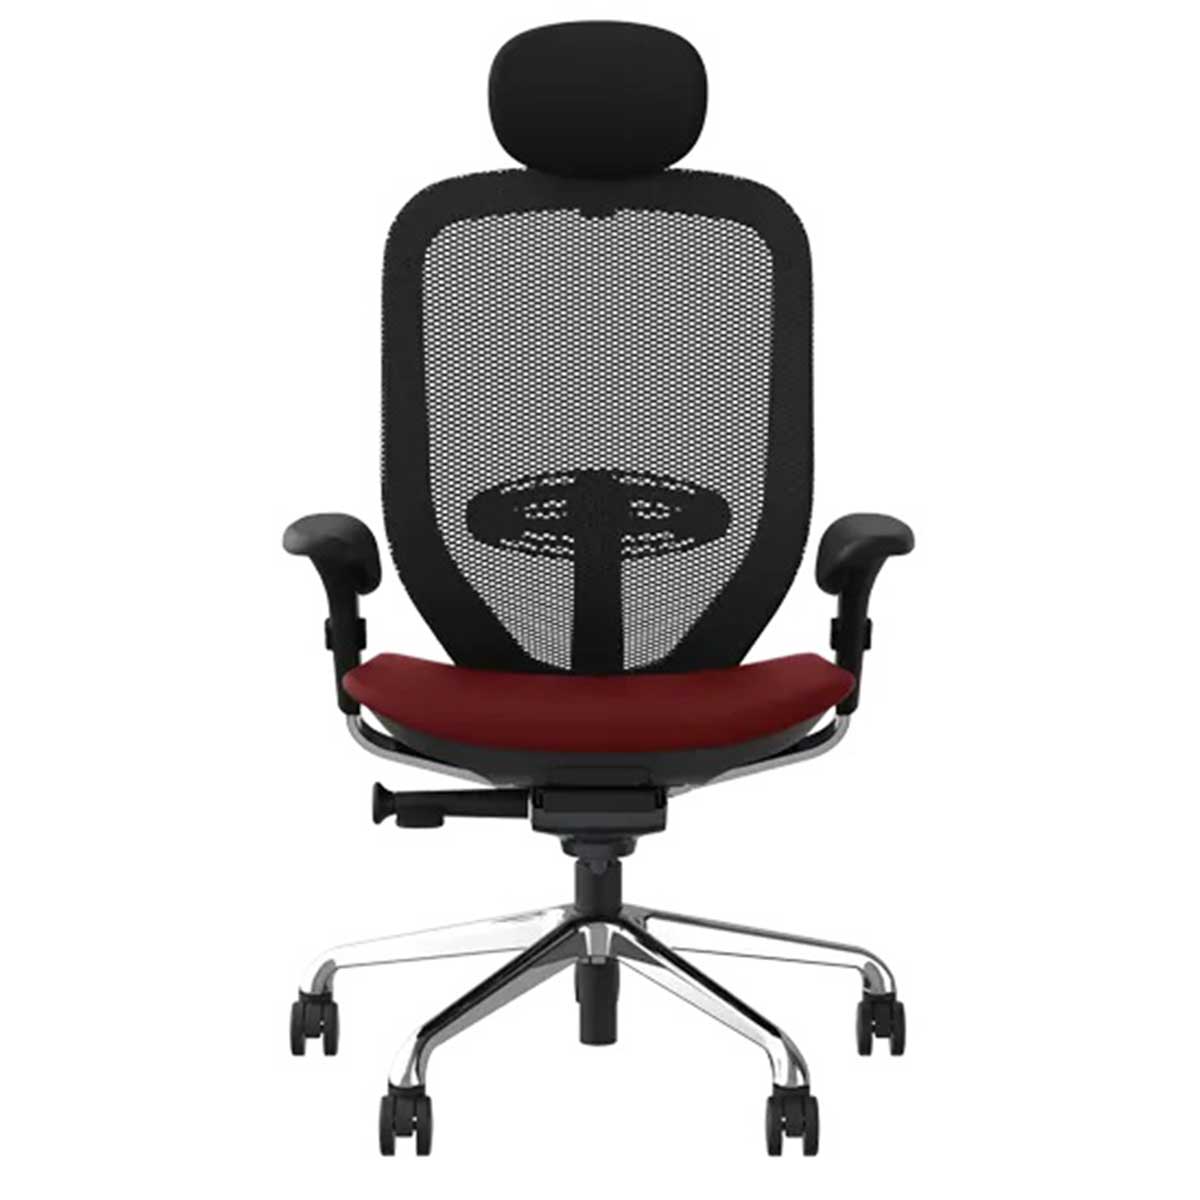 Ergonomic Chairs Manufacturers, Suppliers in Rohini Sector 34